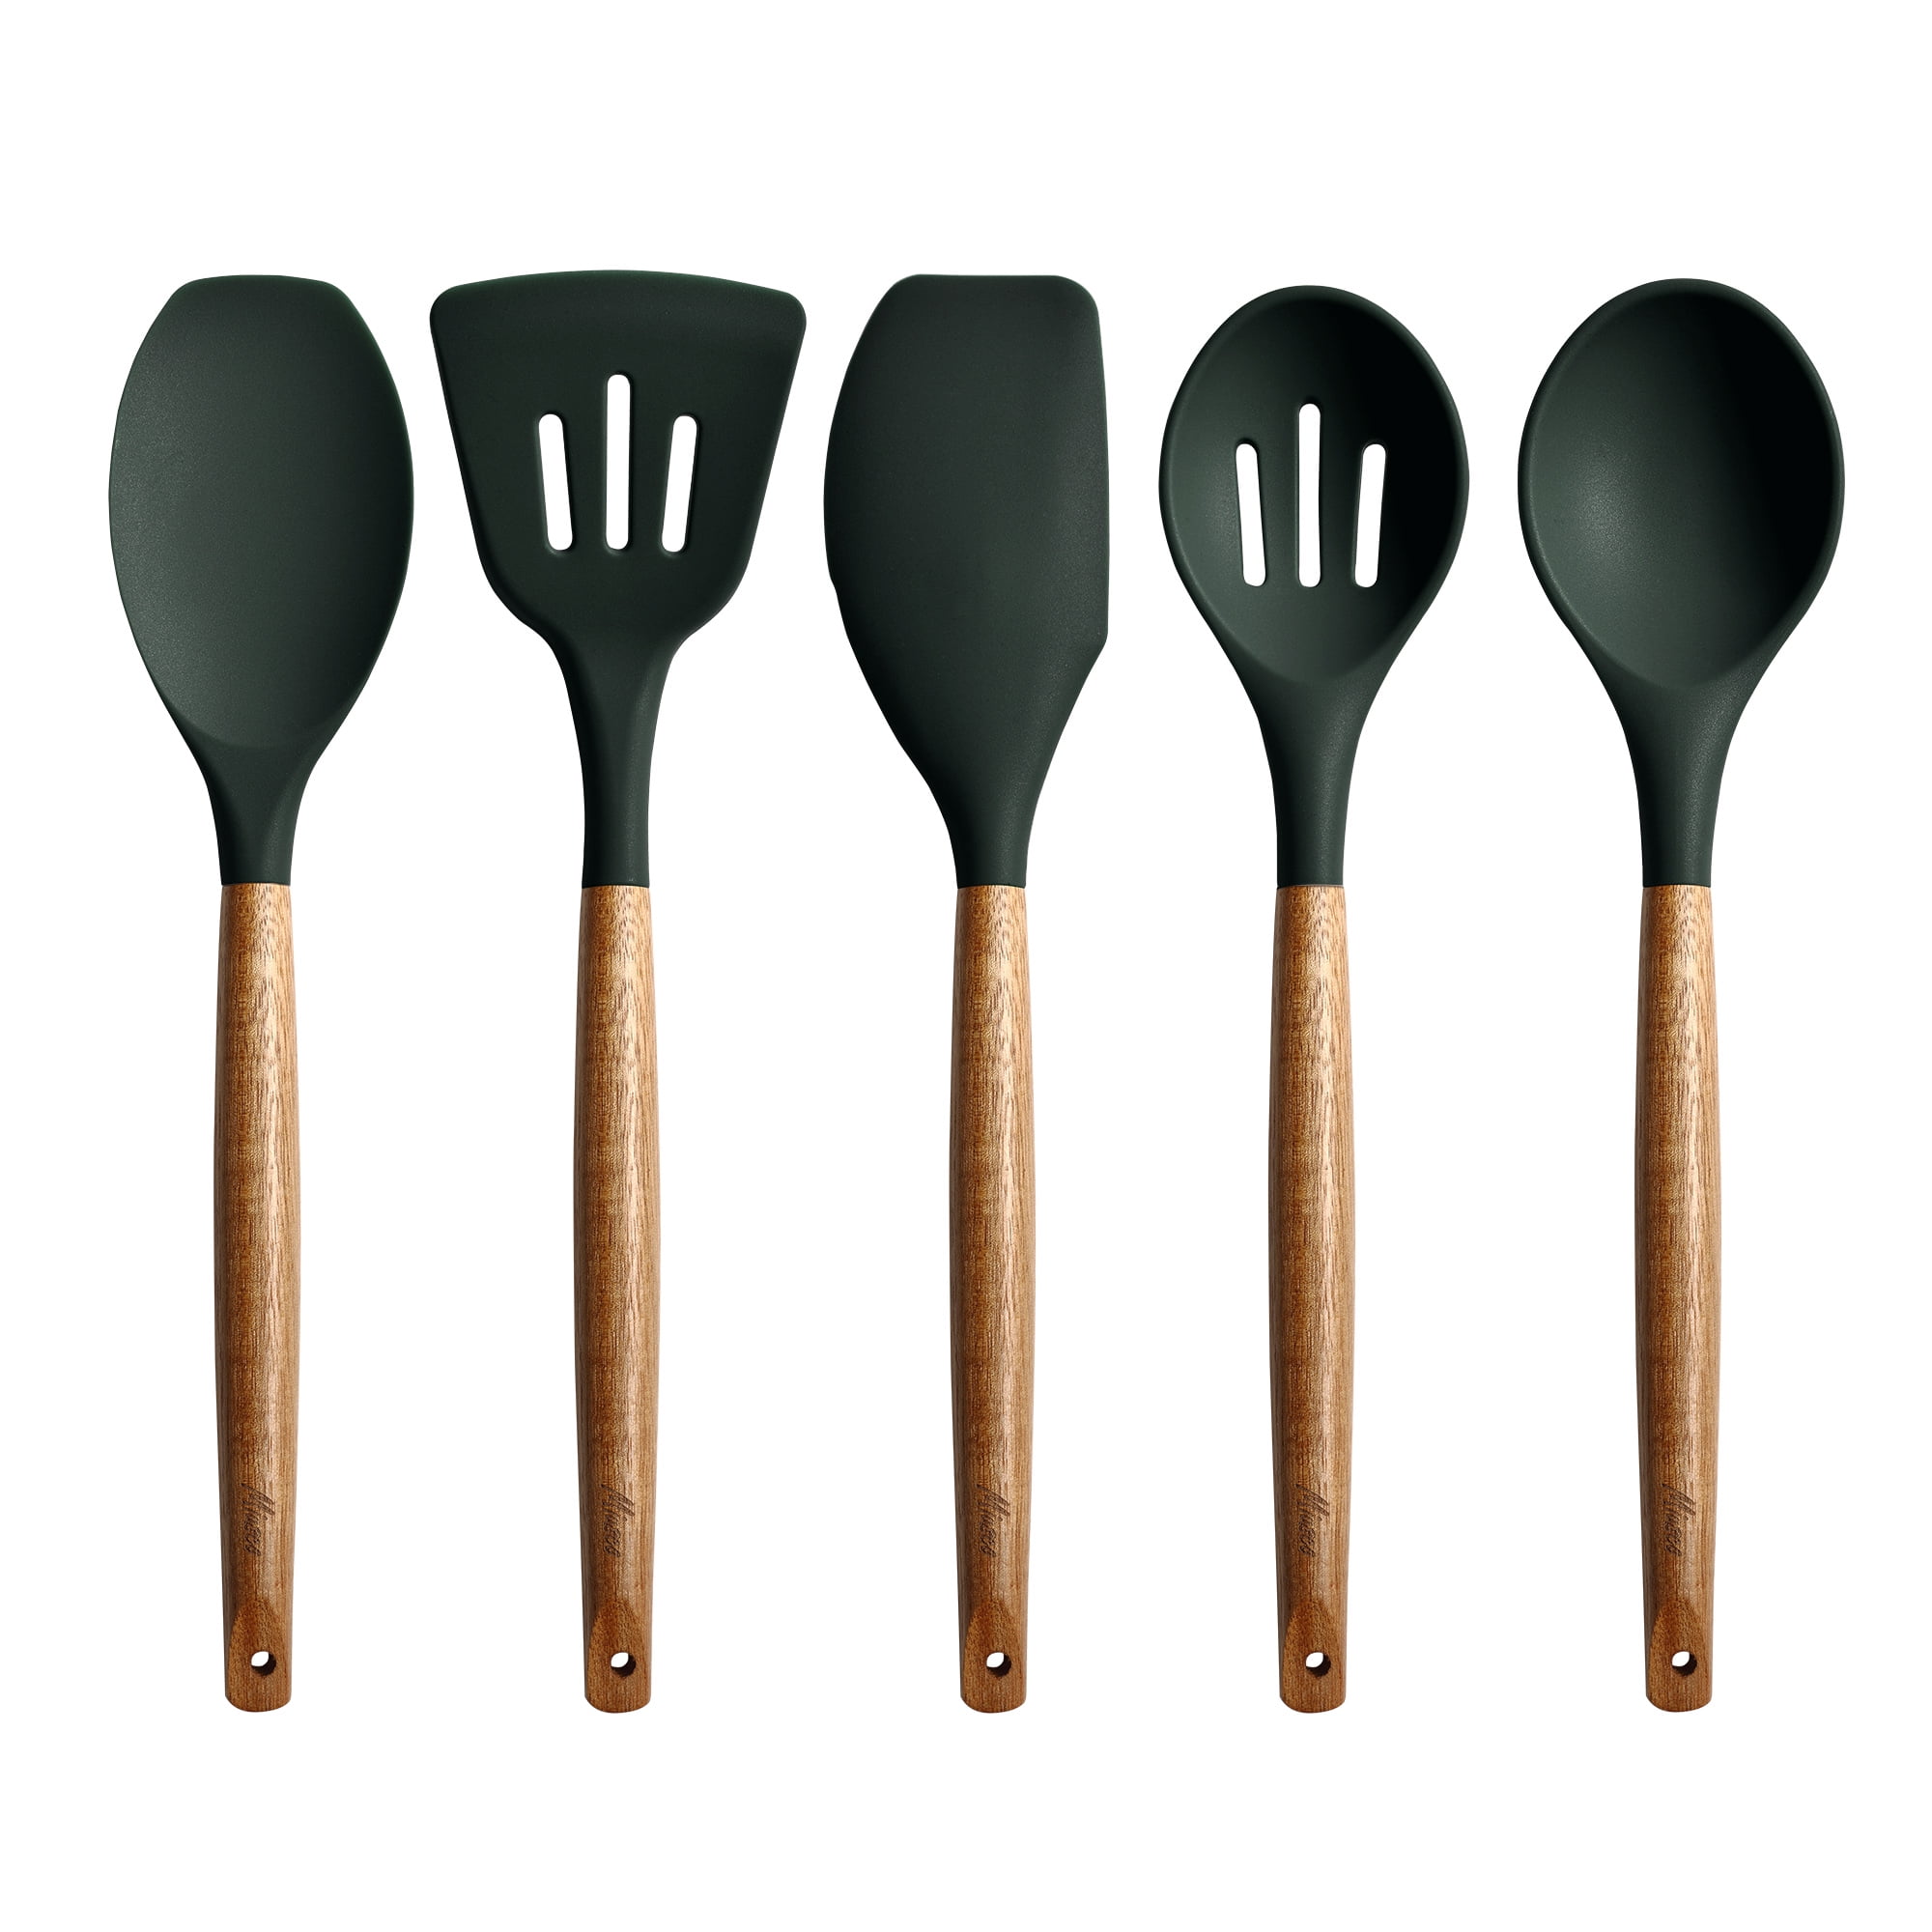 Miusco Non-Stick Silicone Kitchen Utensils Set with Natural Acacia Hard Wood  Handle, 5 Pieces, Grey, BPA Free, Baking, Serving and Cooking Utensils